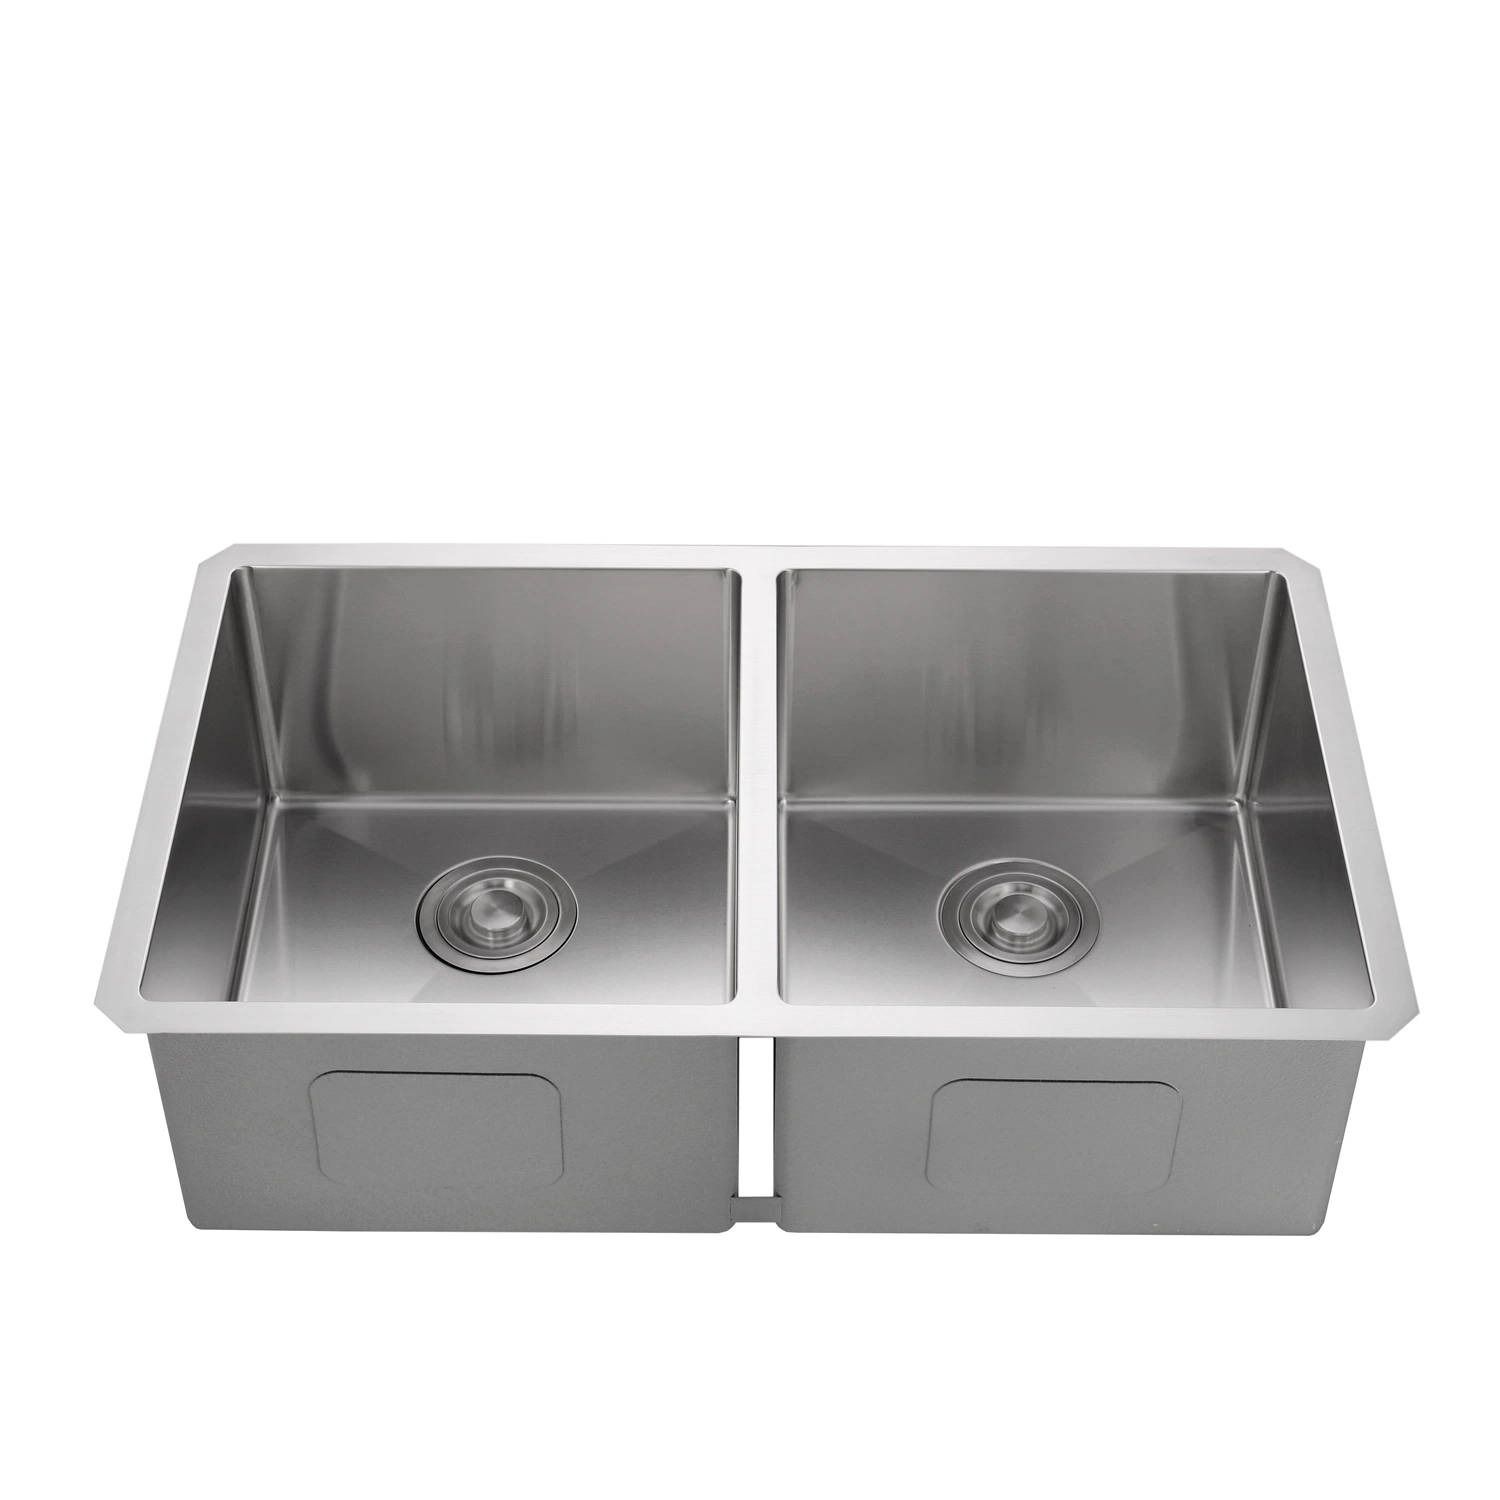 New Hot Sale Stainless Steel Kitchen Sink (7843S)